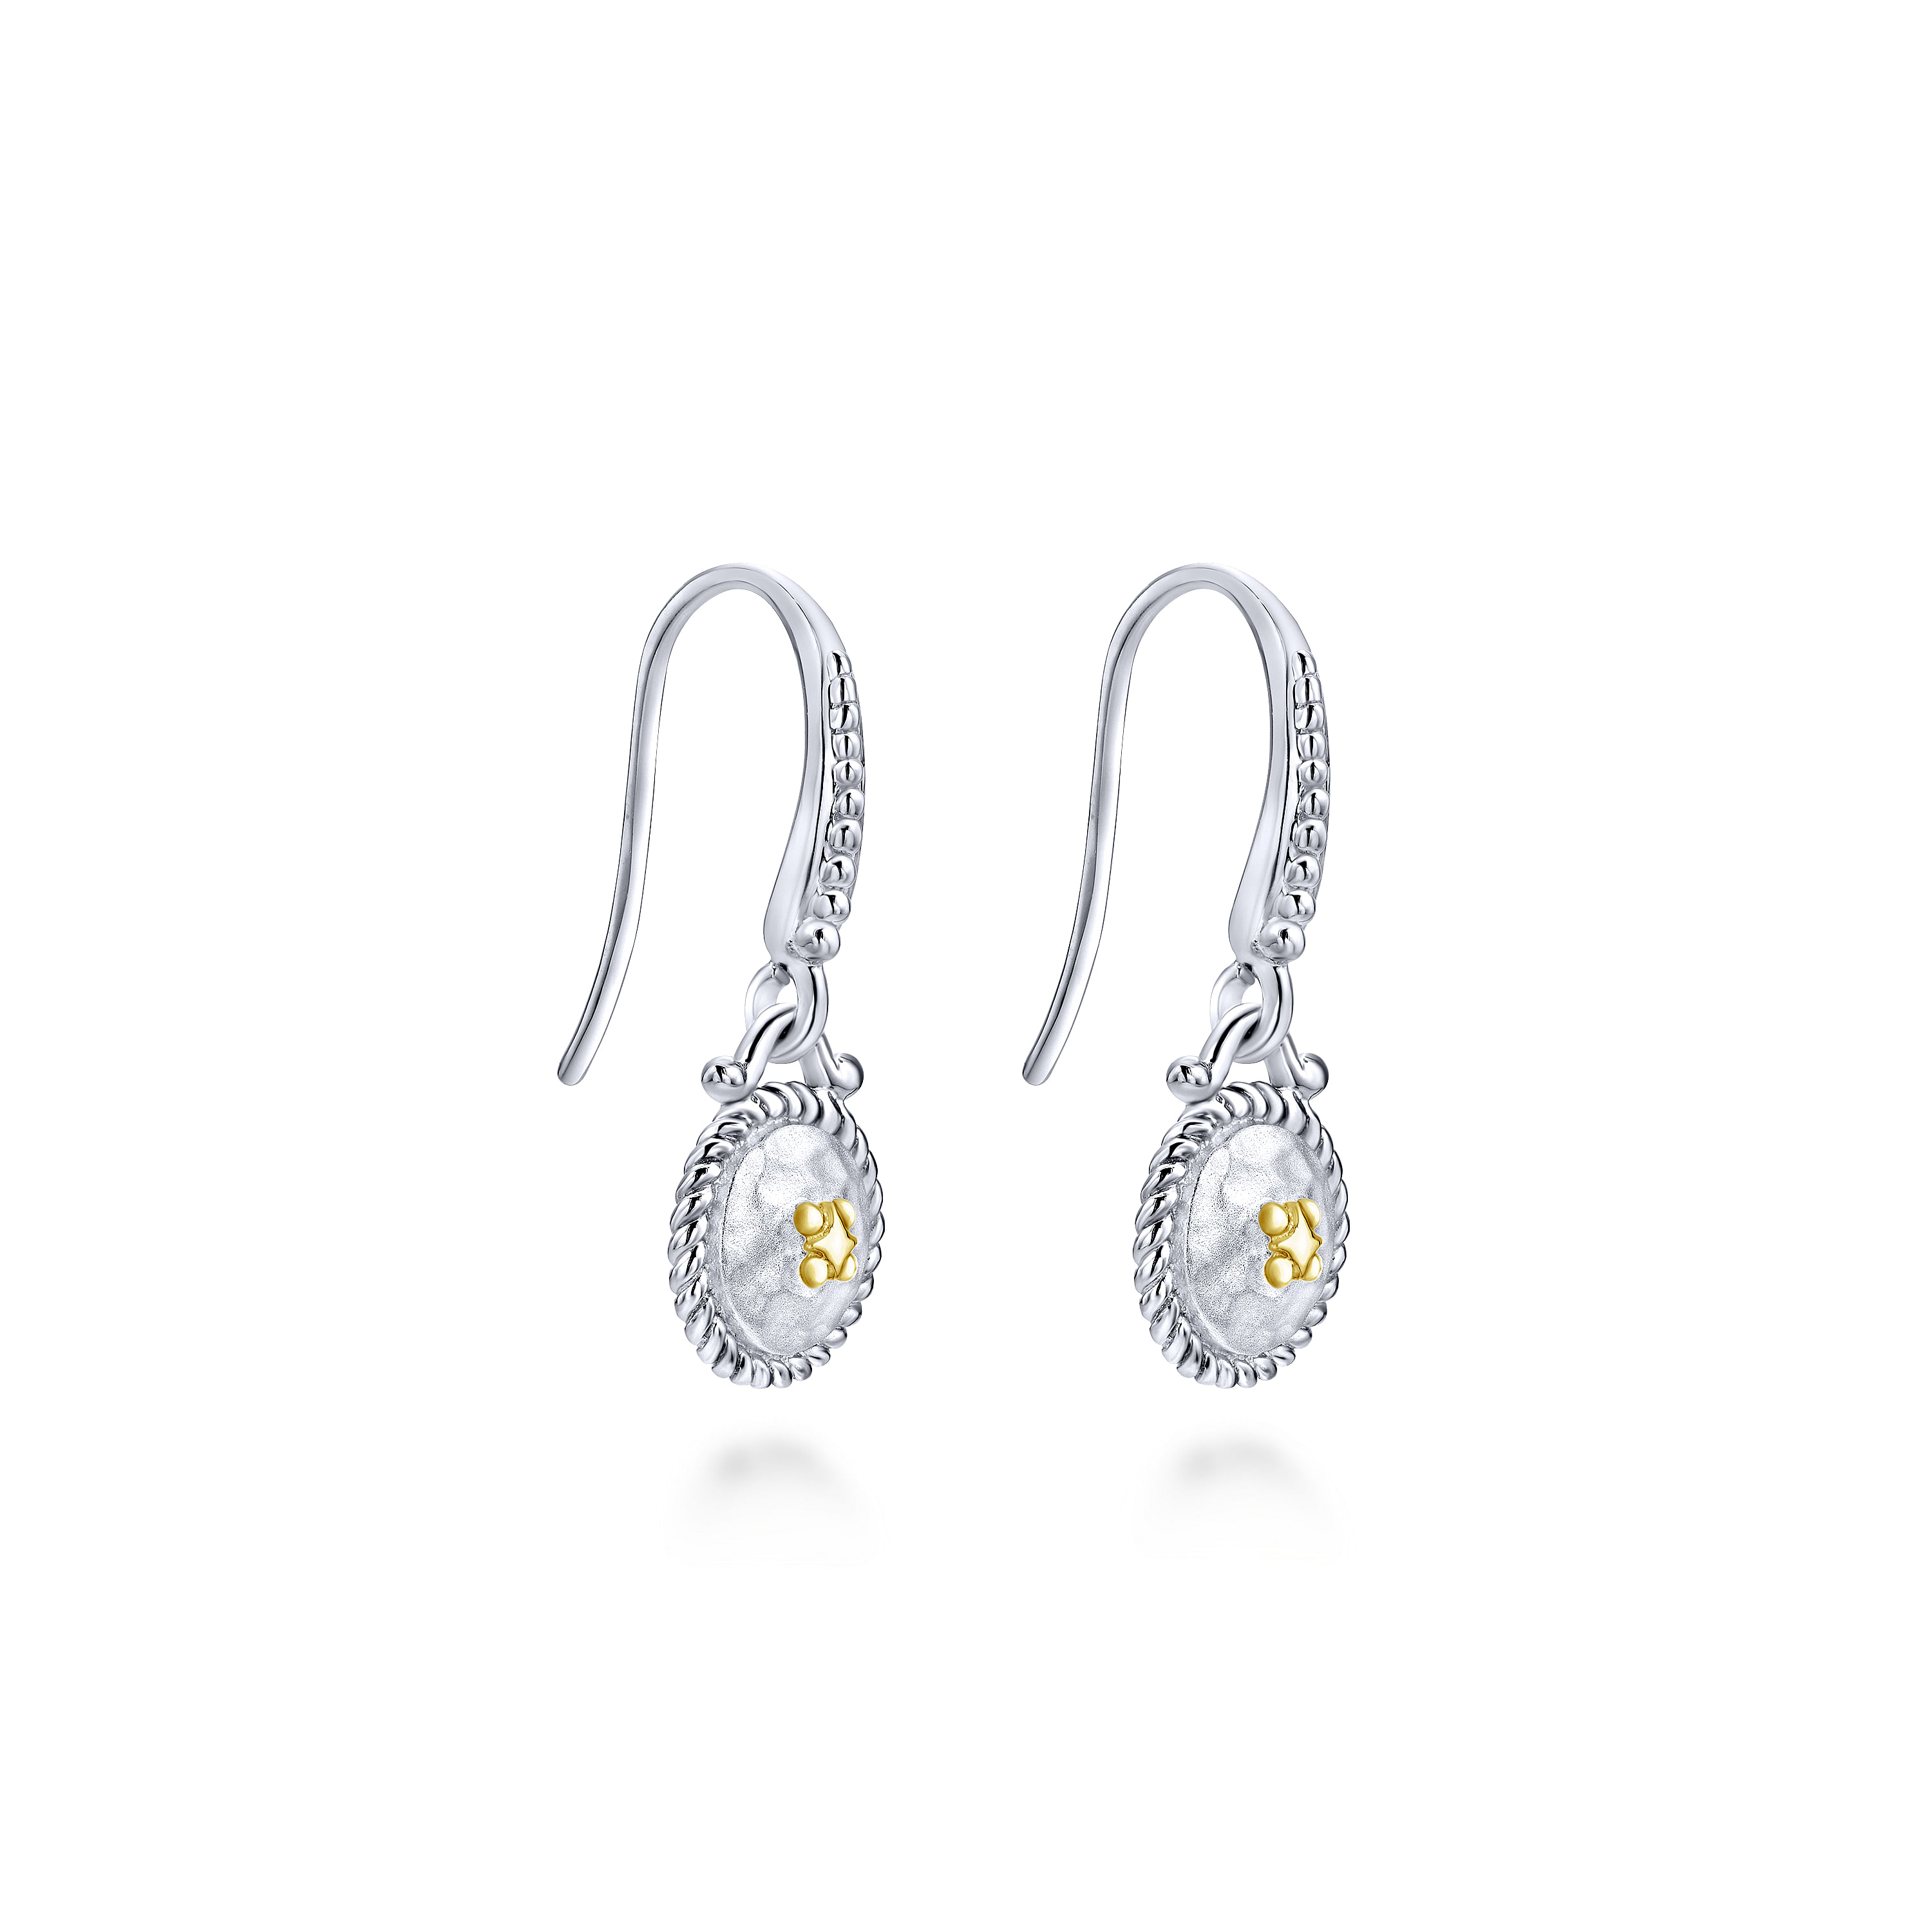 925 Sterling Silver and 18K Yellow Gold Vintage Inspired Round Drop Earrings